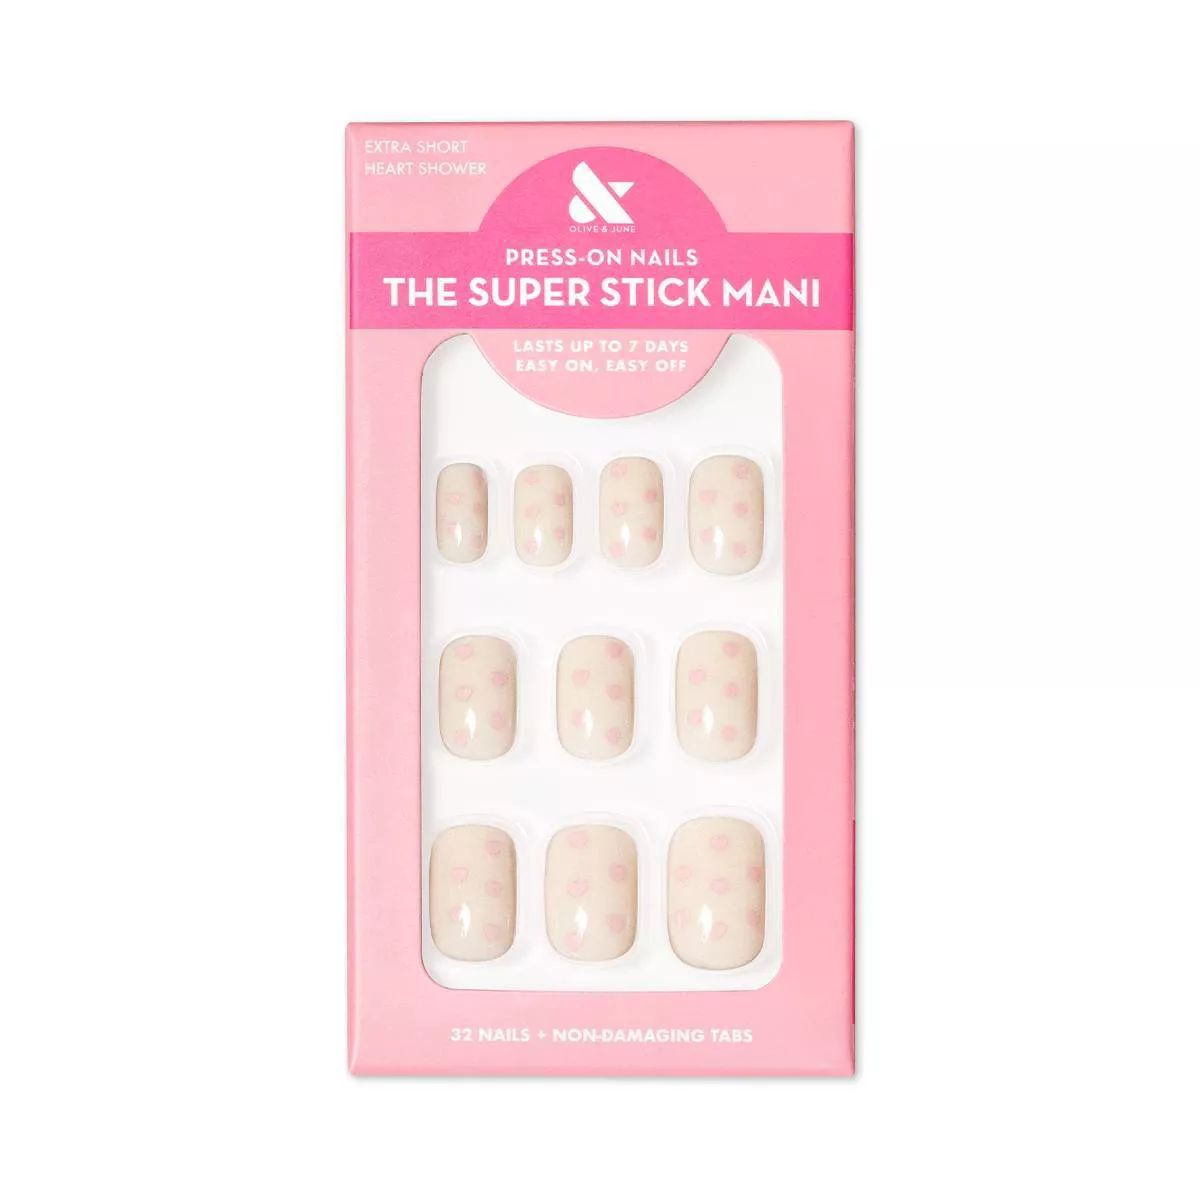 Olive & June Press On Nail Tabs - XS Squoval - Heart Shower - 32ct | Target